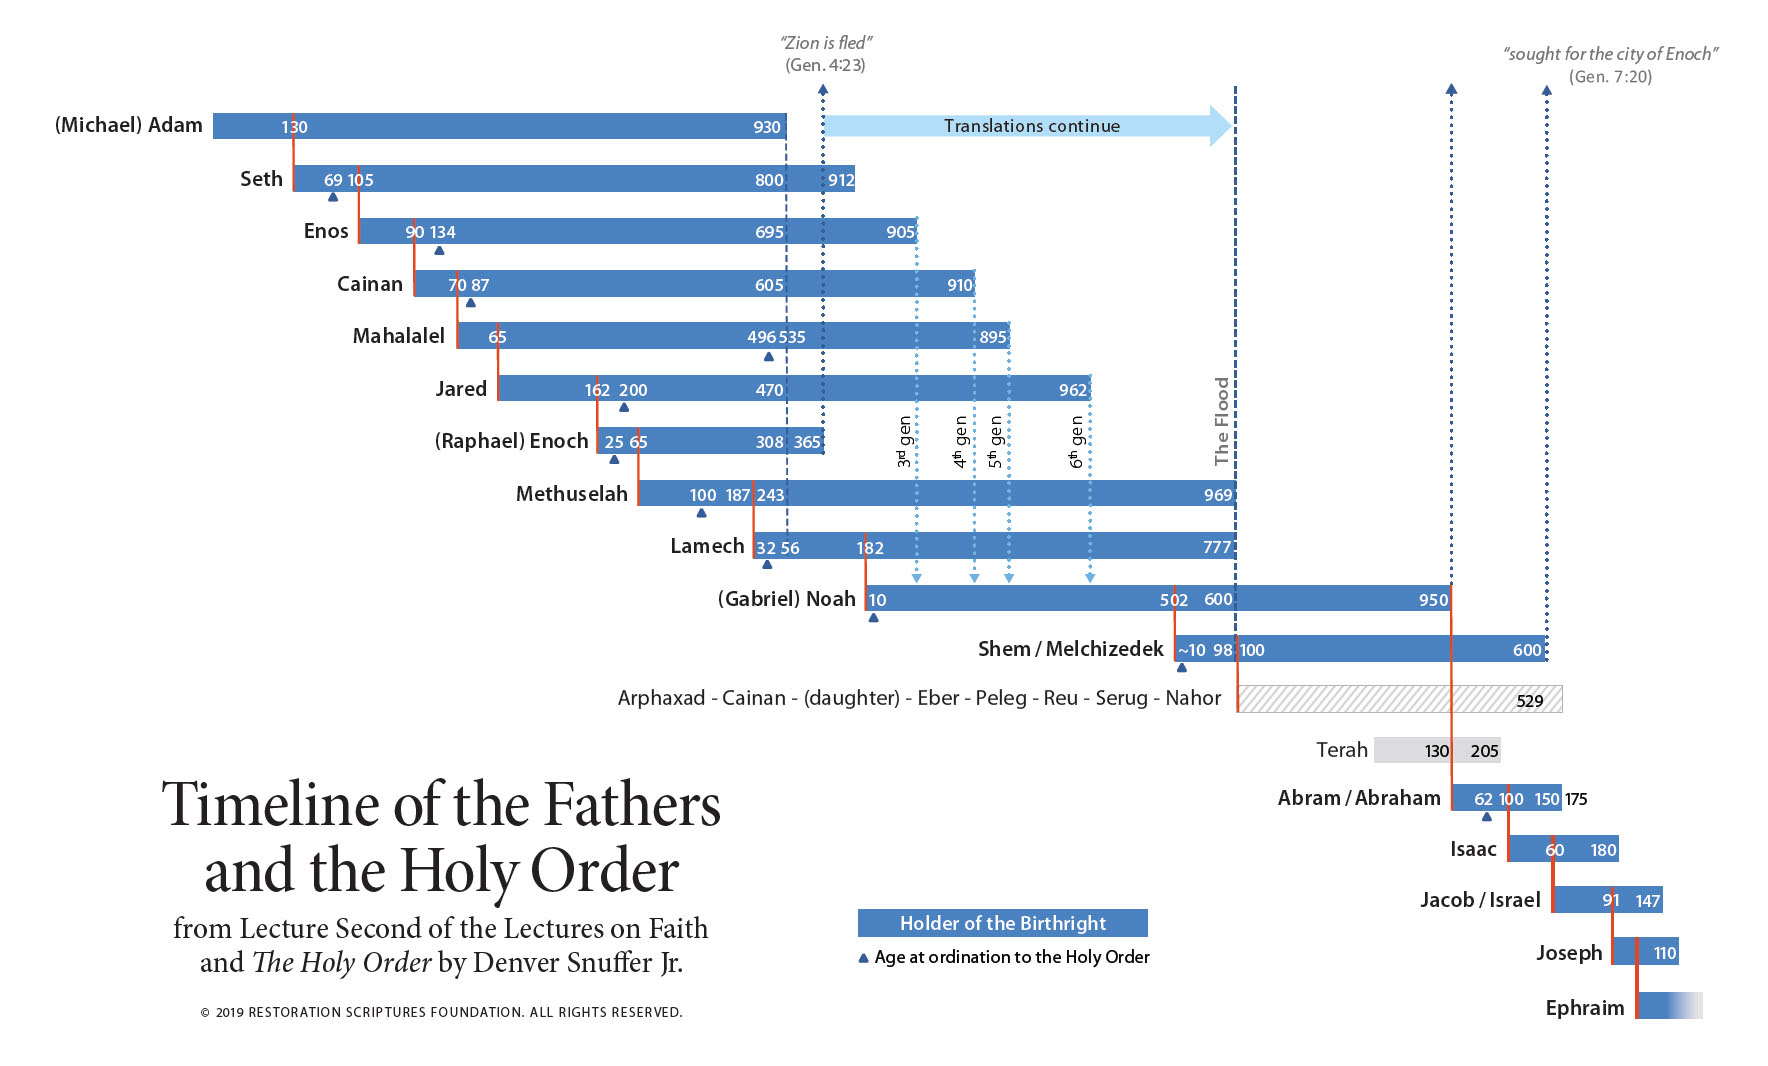 Timeline of the Fathers